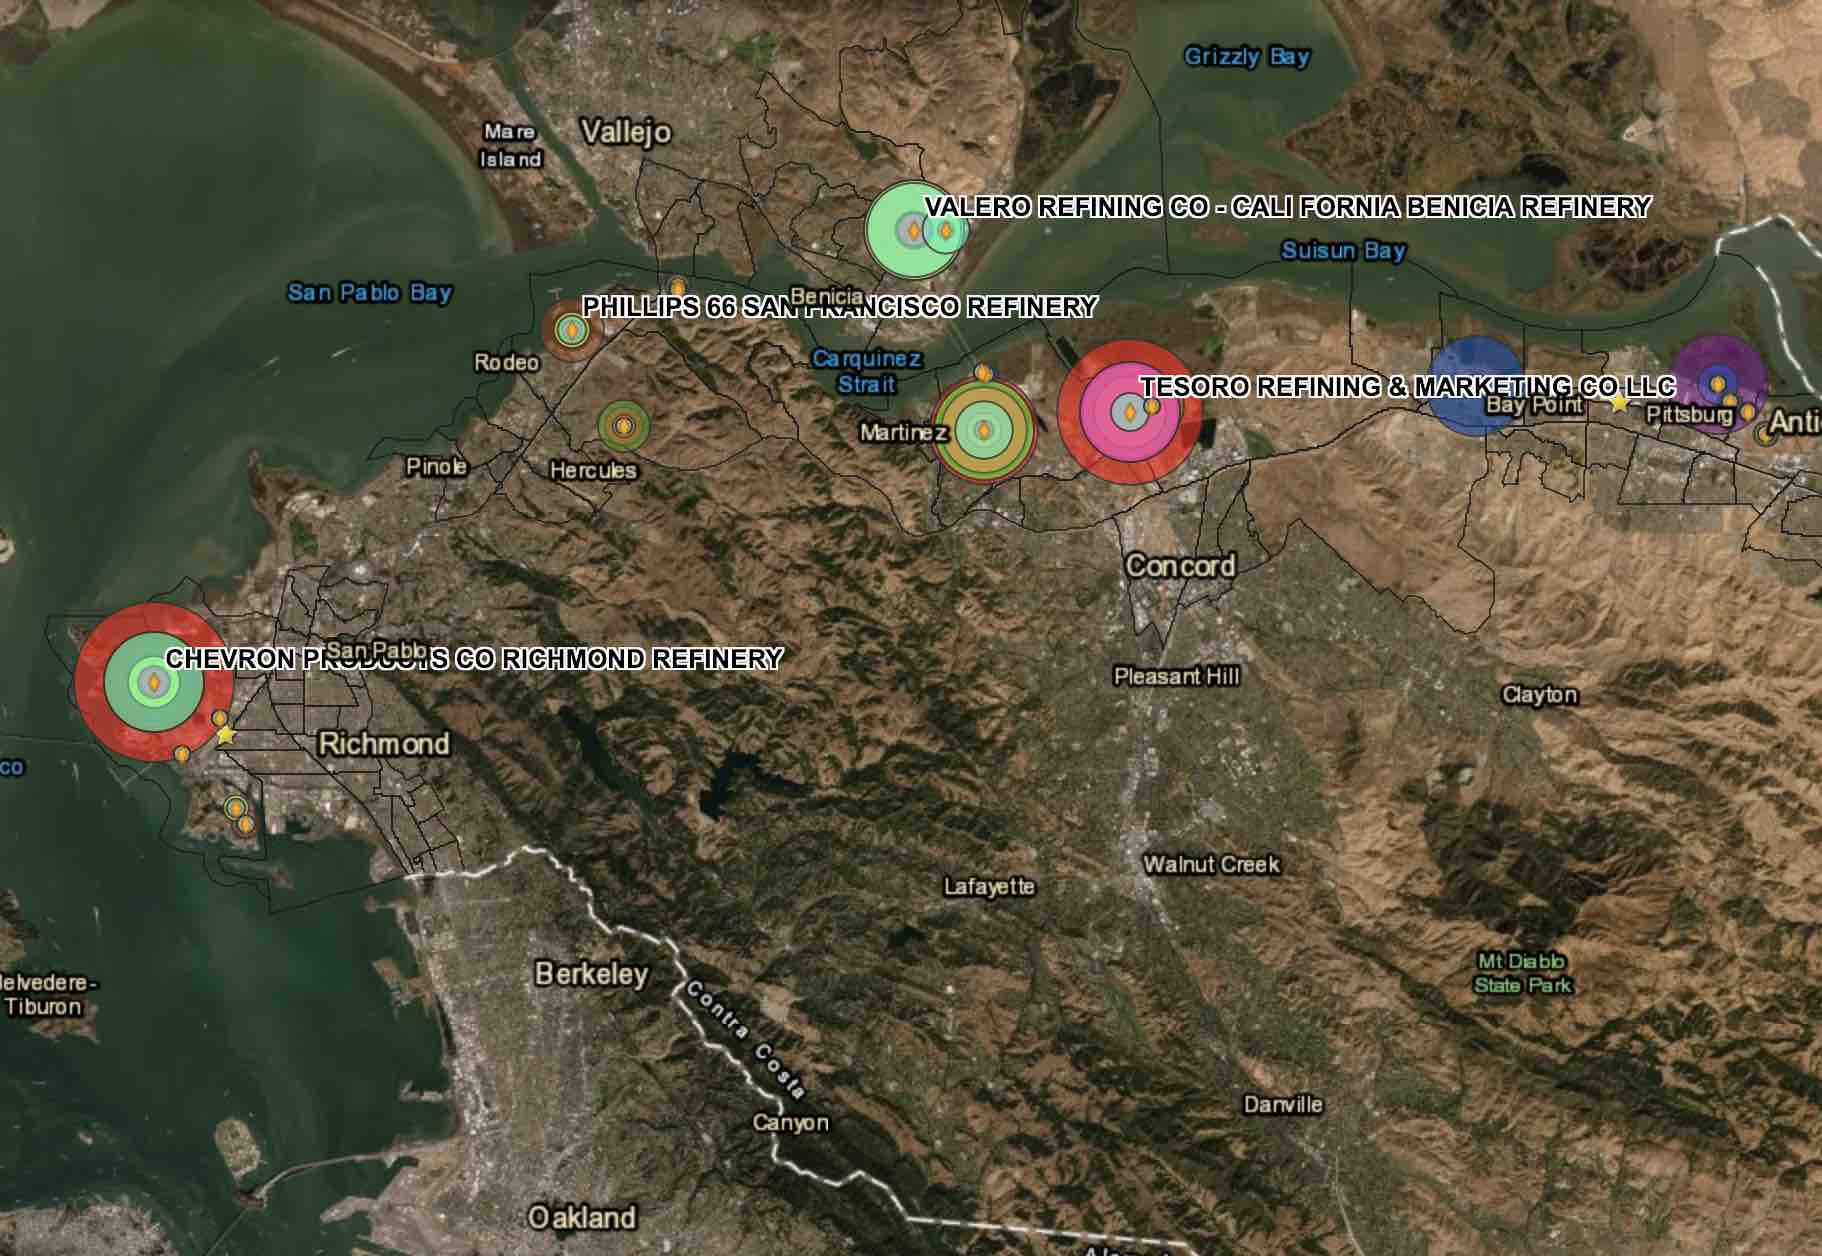 California East Bay refinery emissions